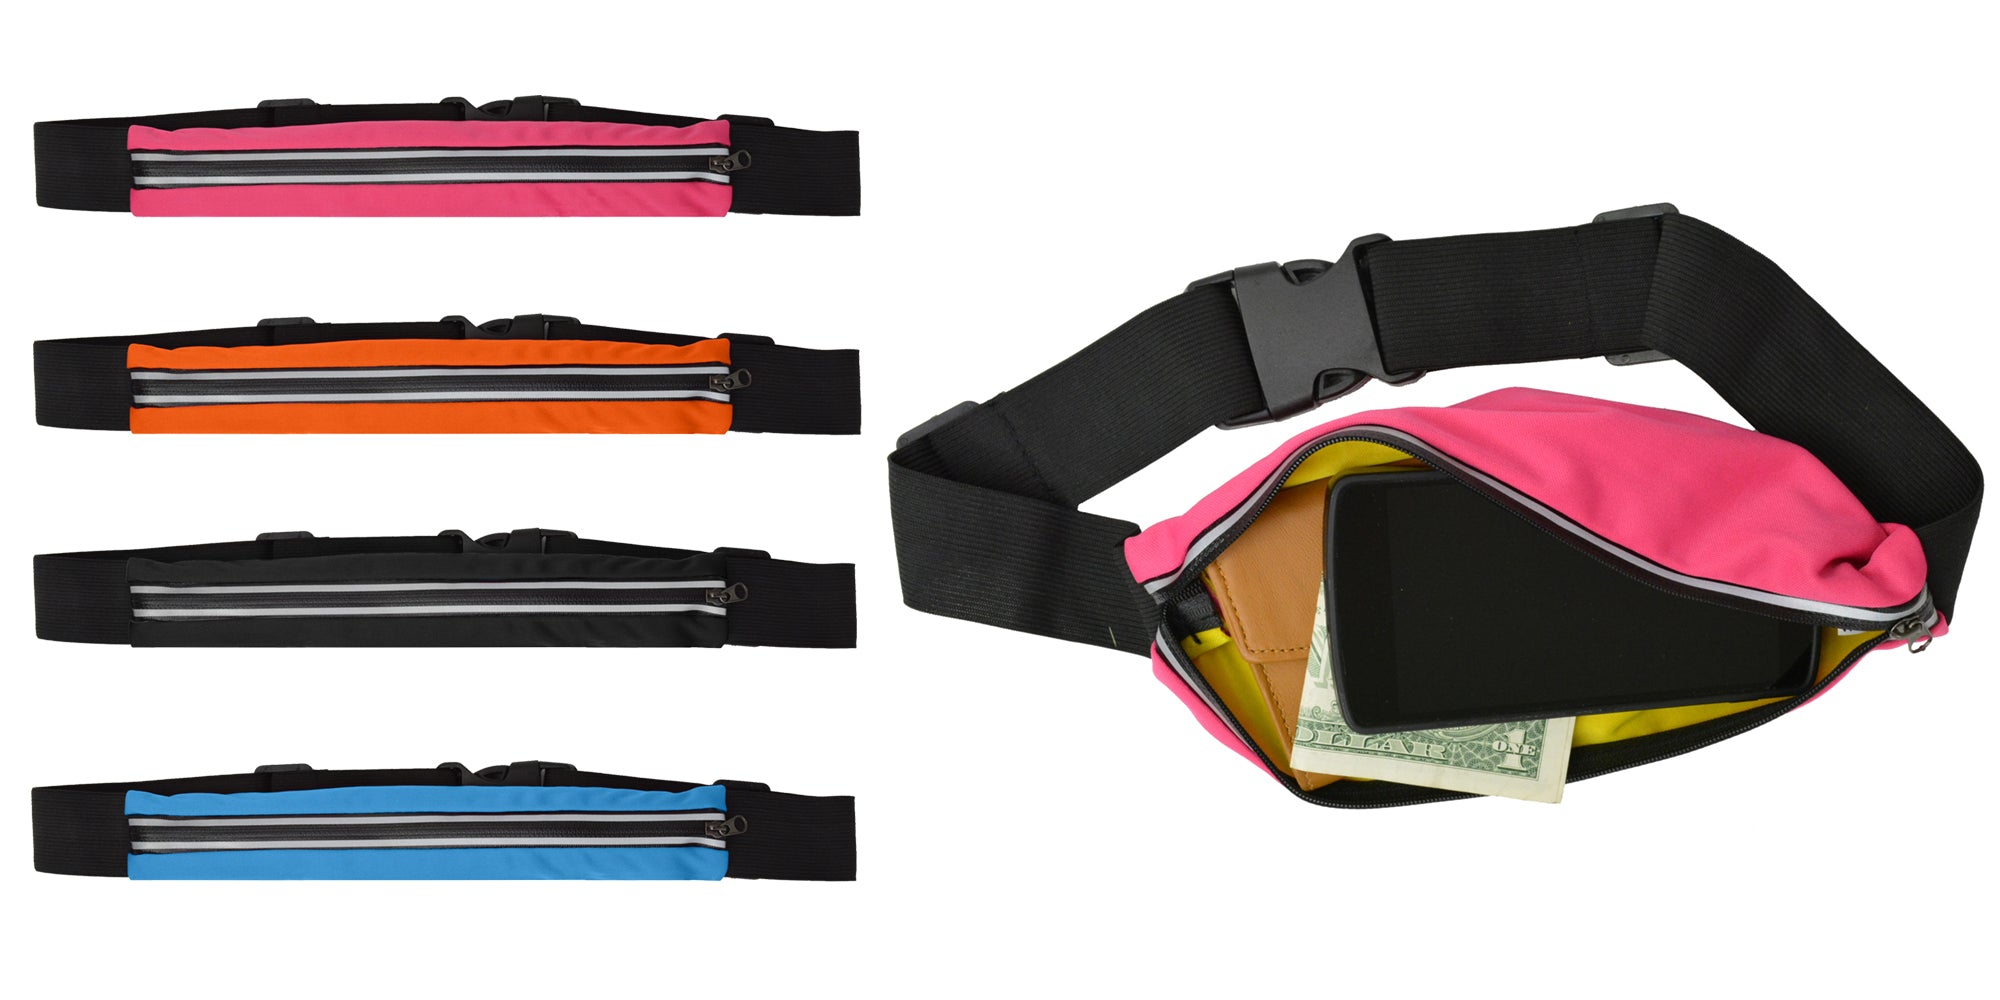 Protector Belt - with multi pockets Pouch